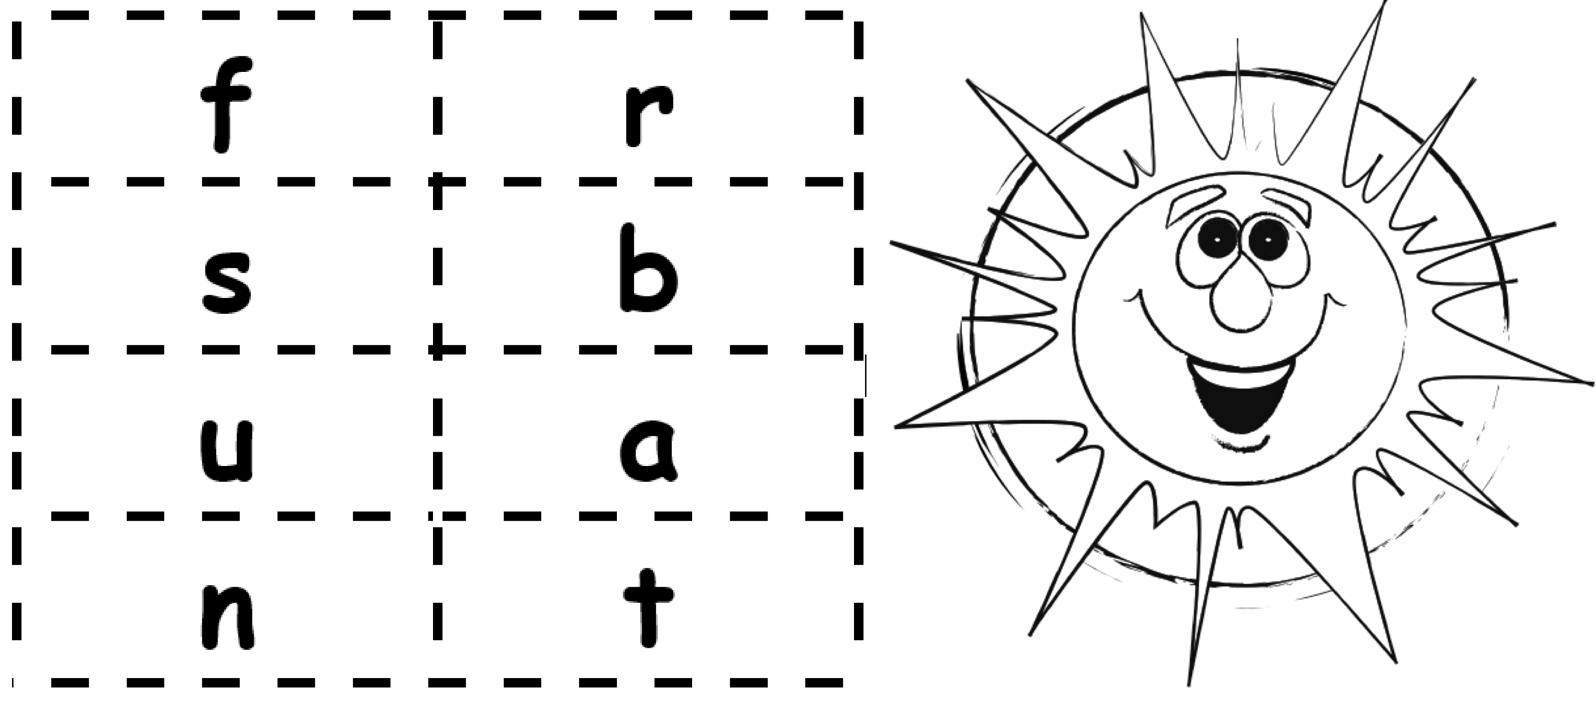 sun-graphic-and-word-blending-cards